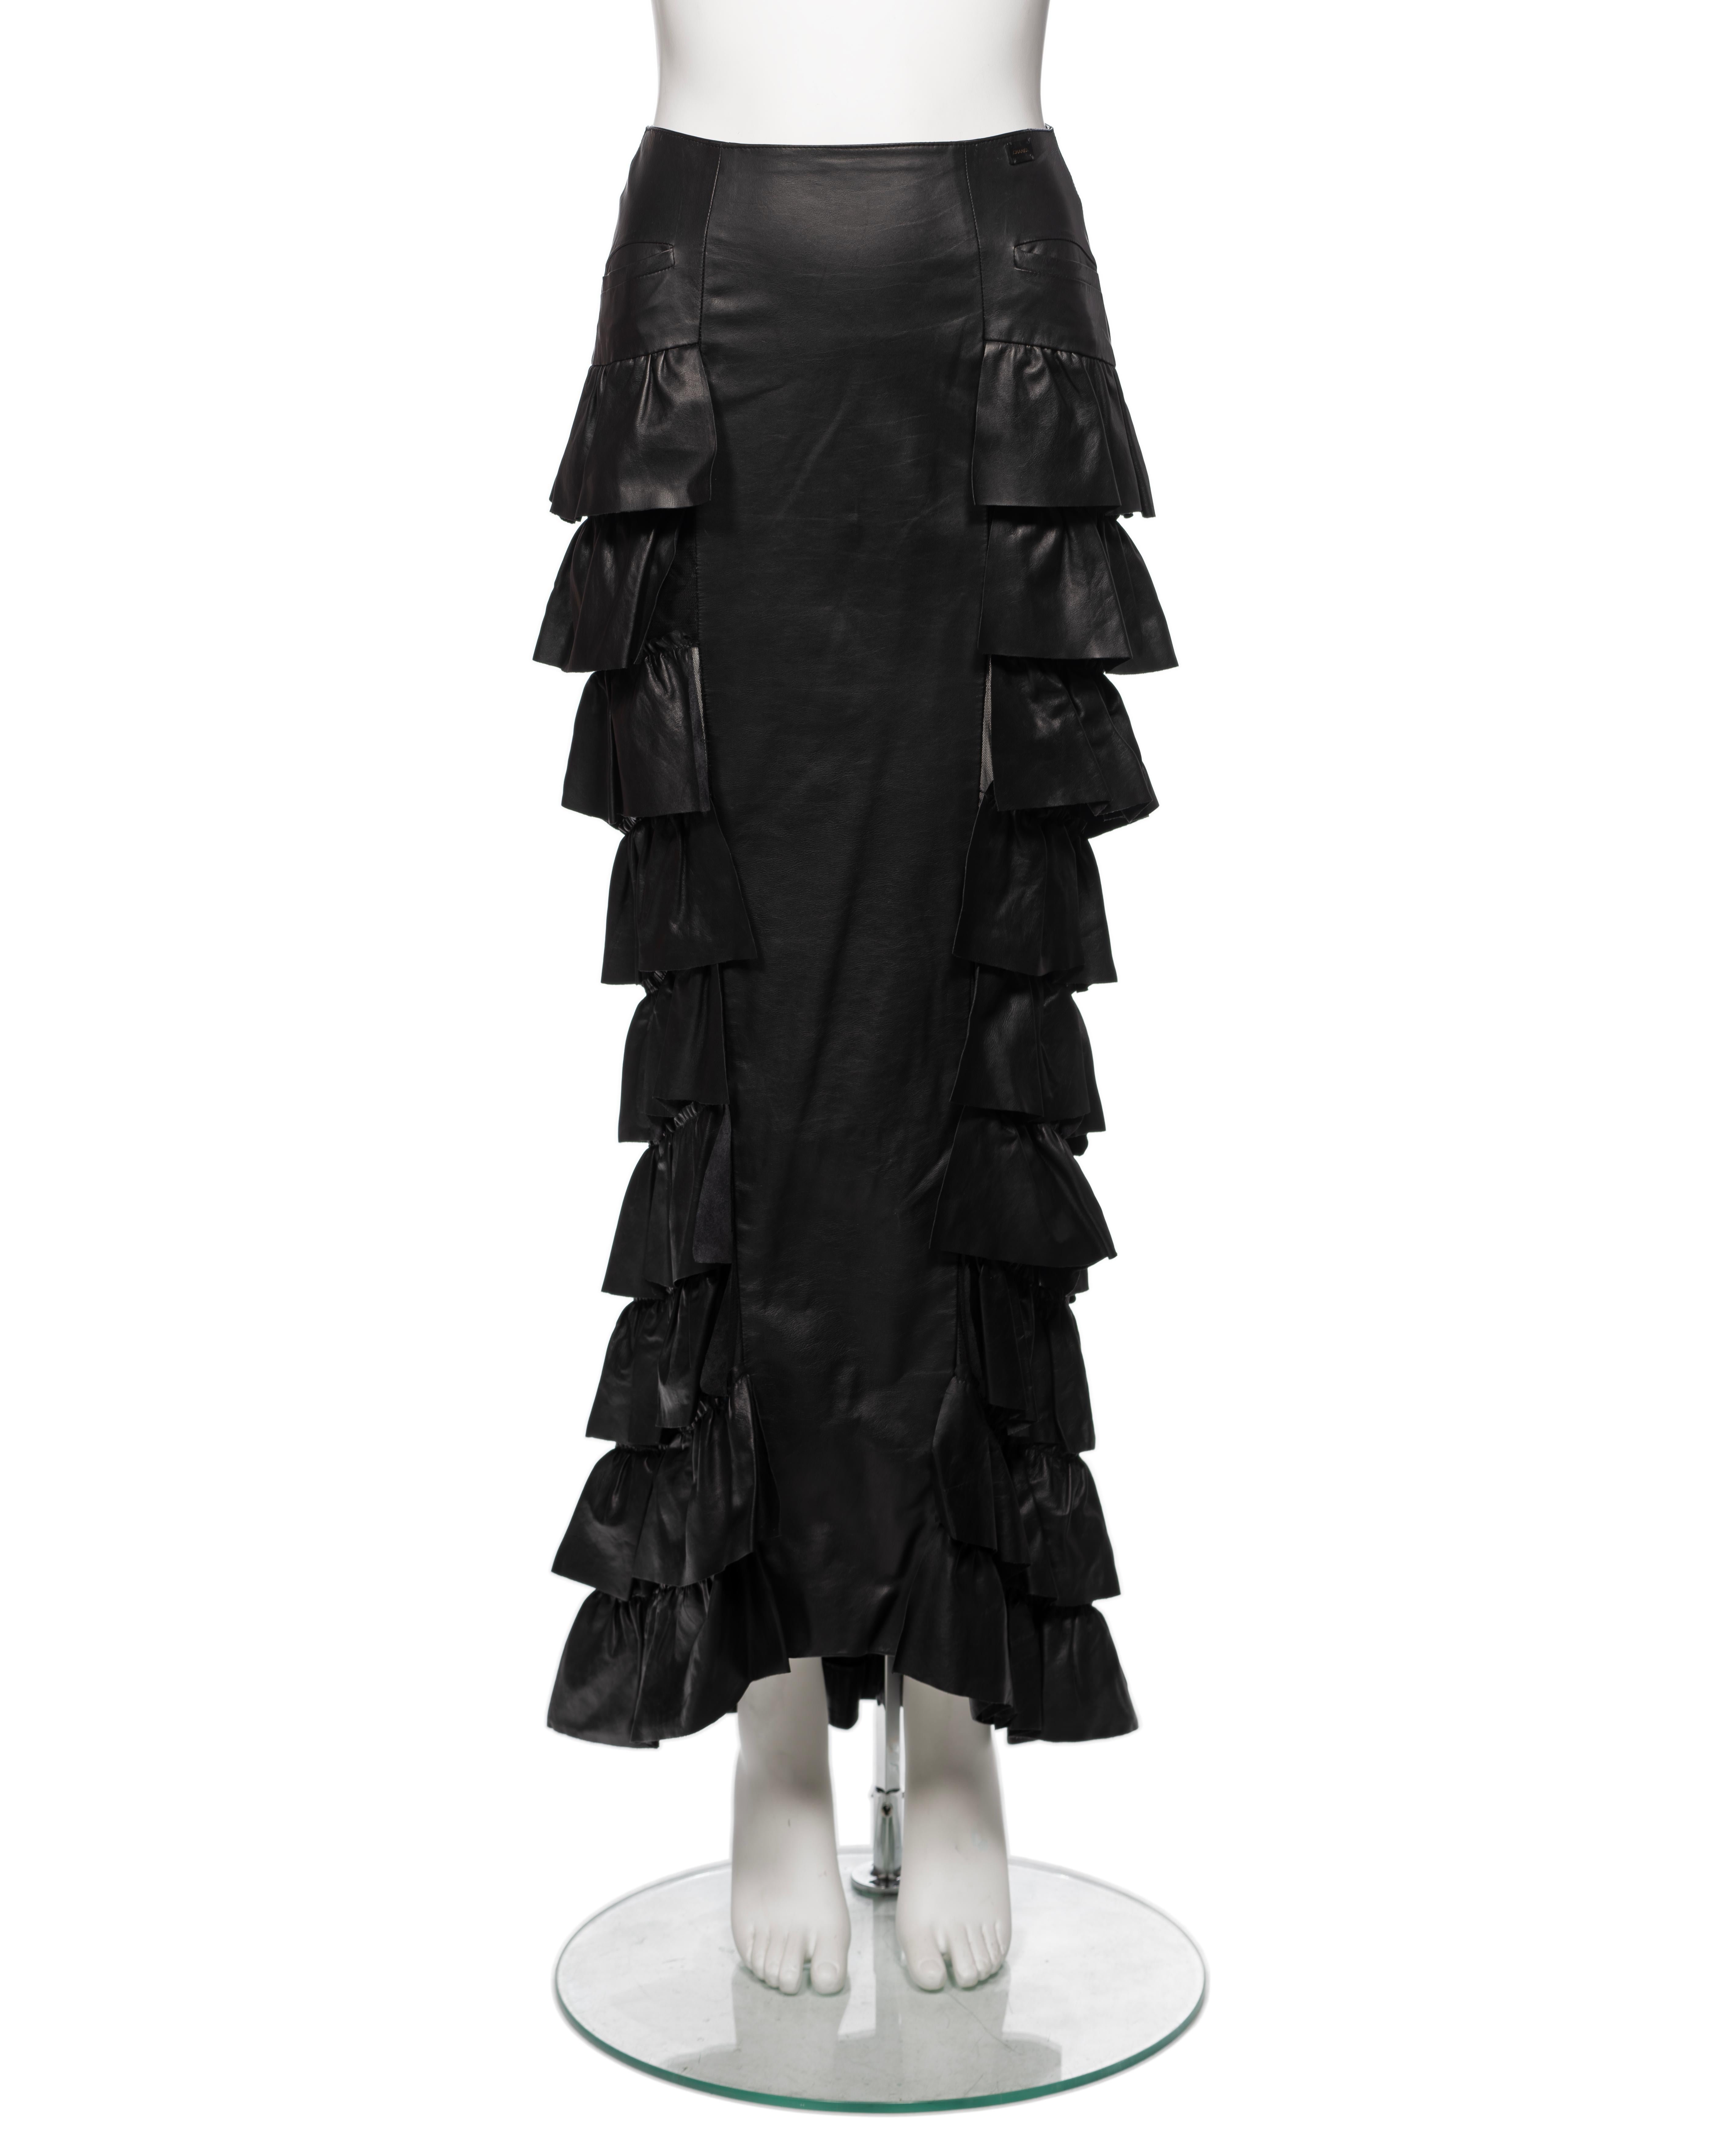 Women's Chanel by Karl Lagerfeld Black Leather Tiered Ruffled Maxi Skirt, FW 2001 For Sale